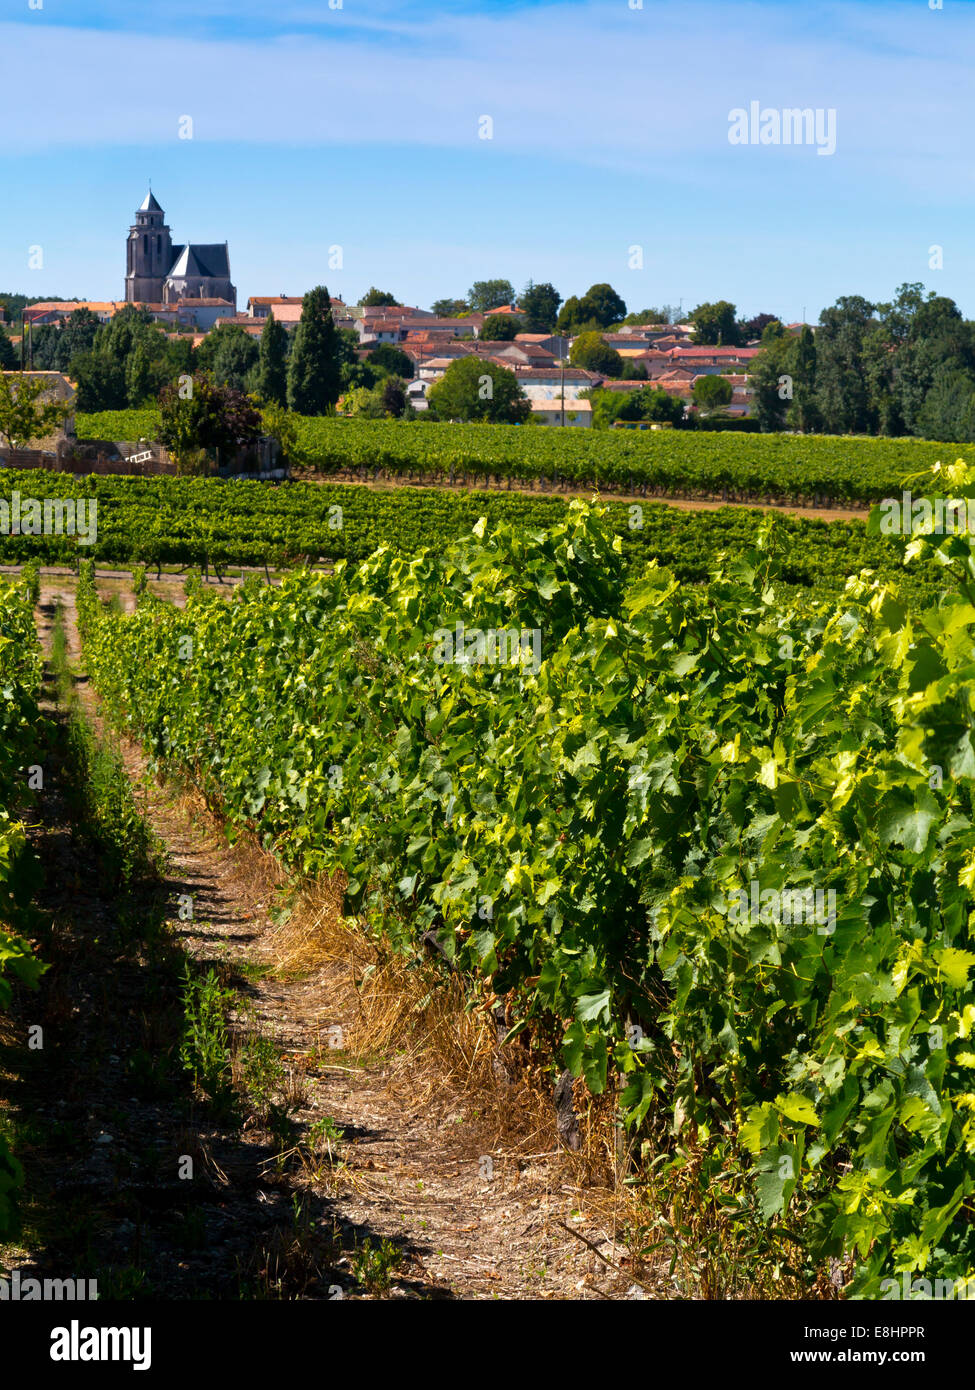 Vineyard with grapes growing in summer near the village of Lonzac in the Charente-Maritime region of south west France Stock Photo